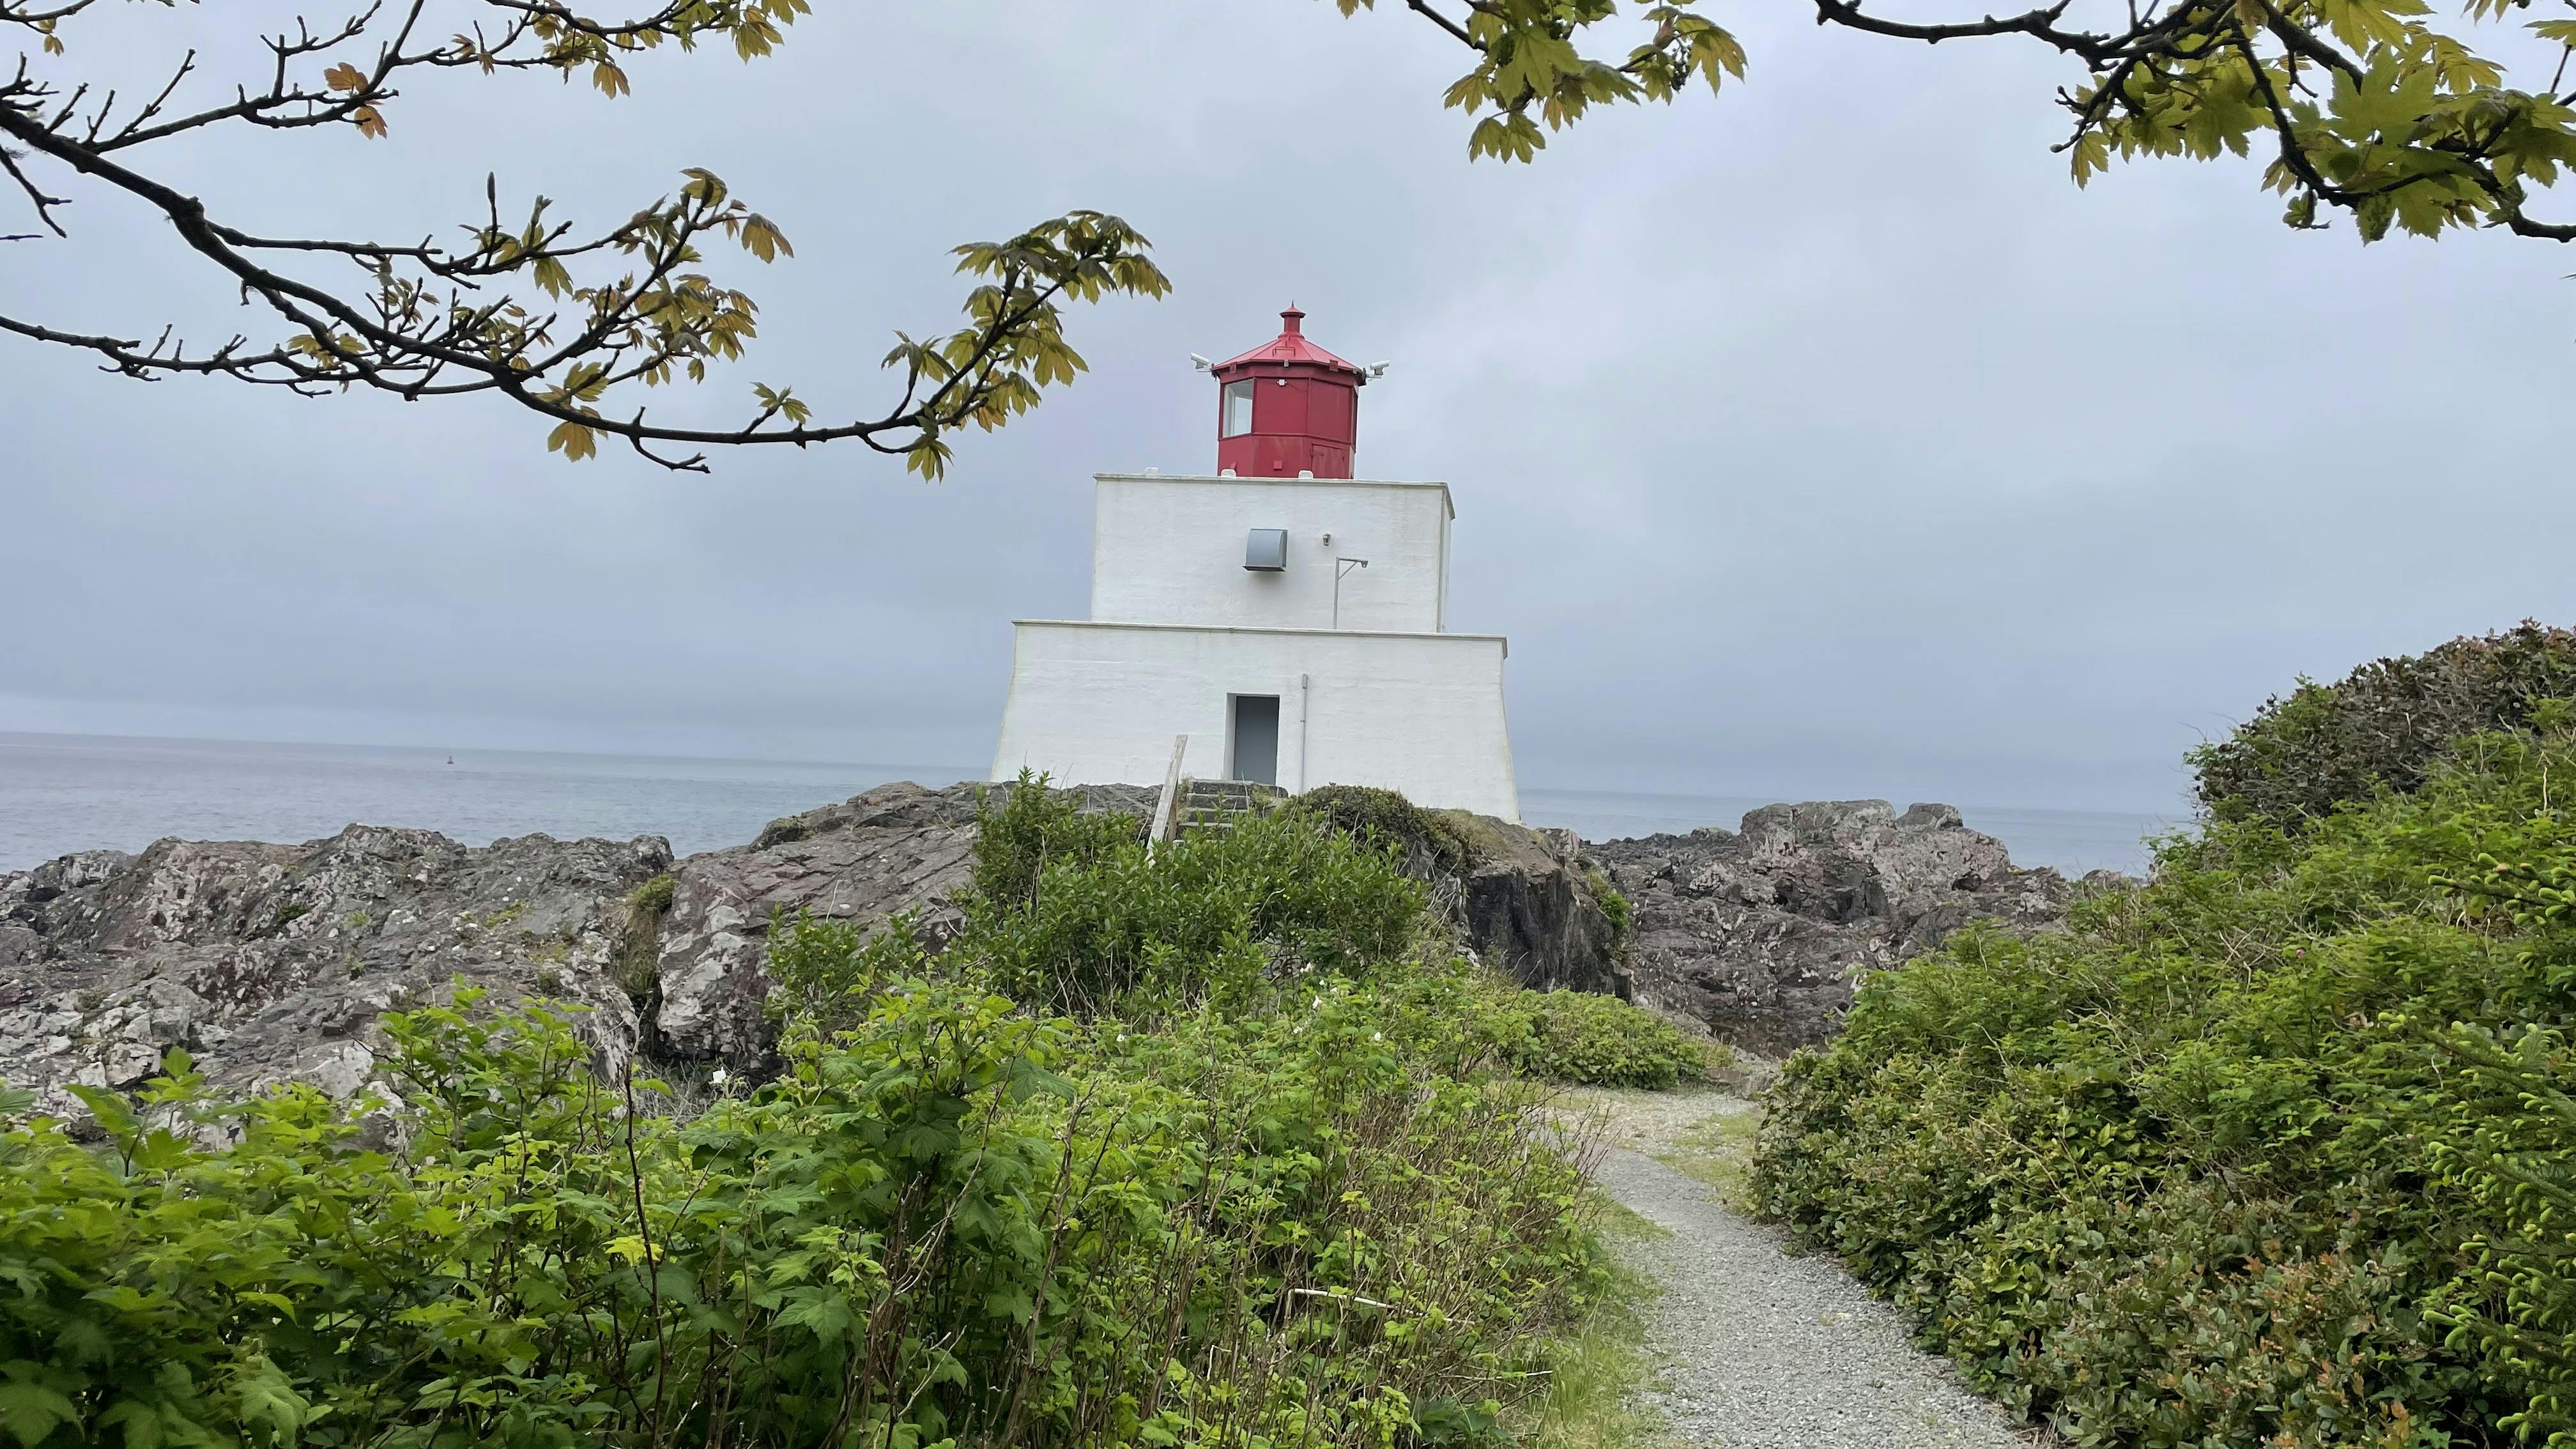 Amphrite Lighthouse on cloudy day.